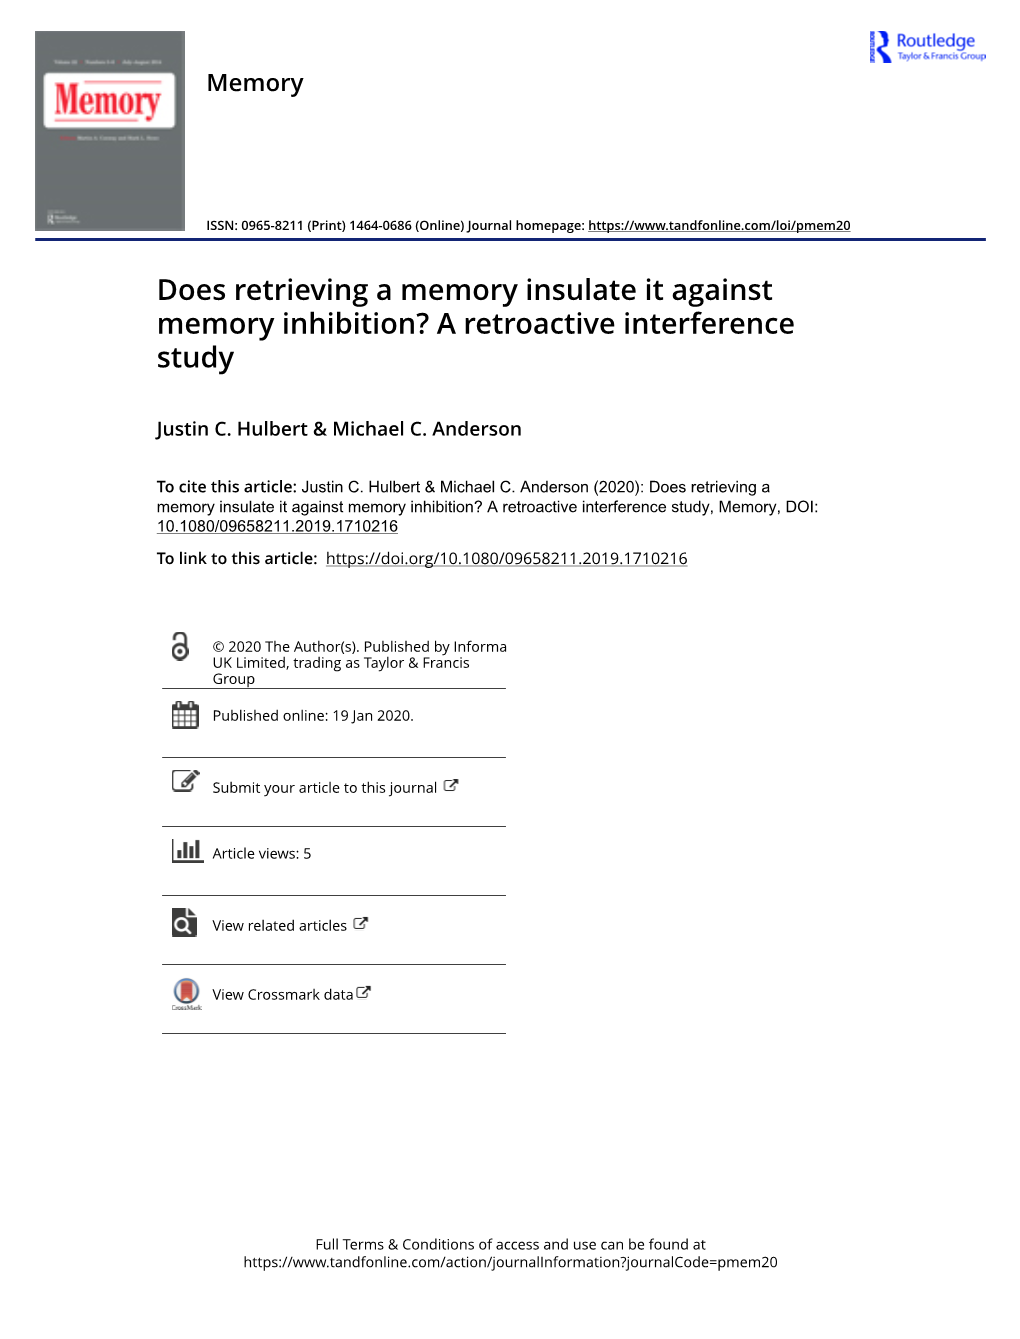 Does Retrieving a Memory Insulate It Against Memory Inhibition? a Retroactive Interference Study